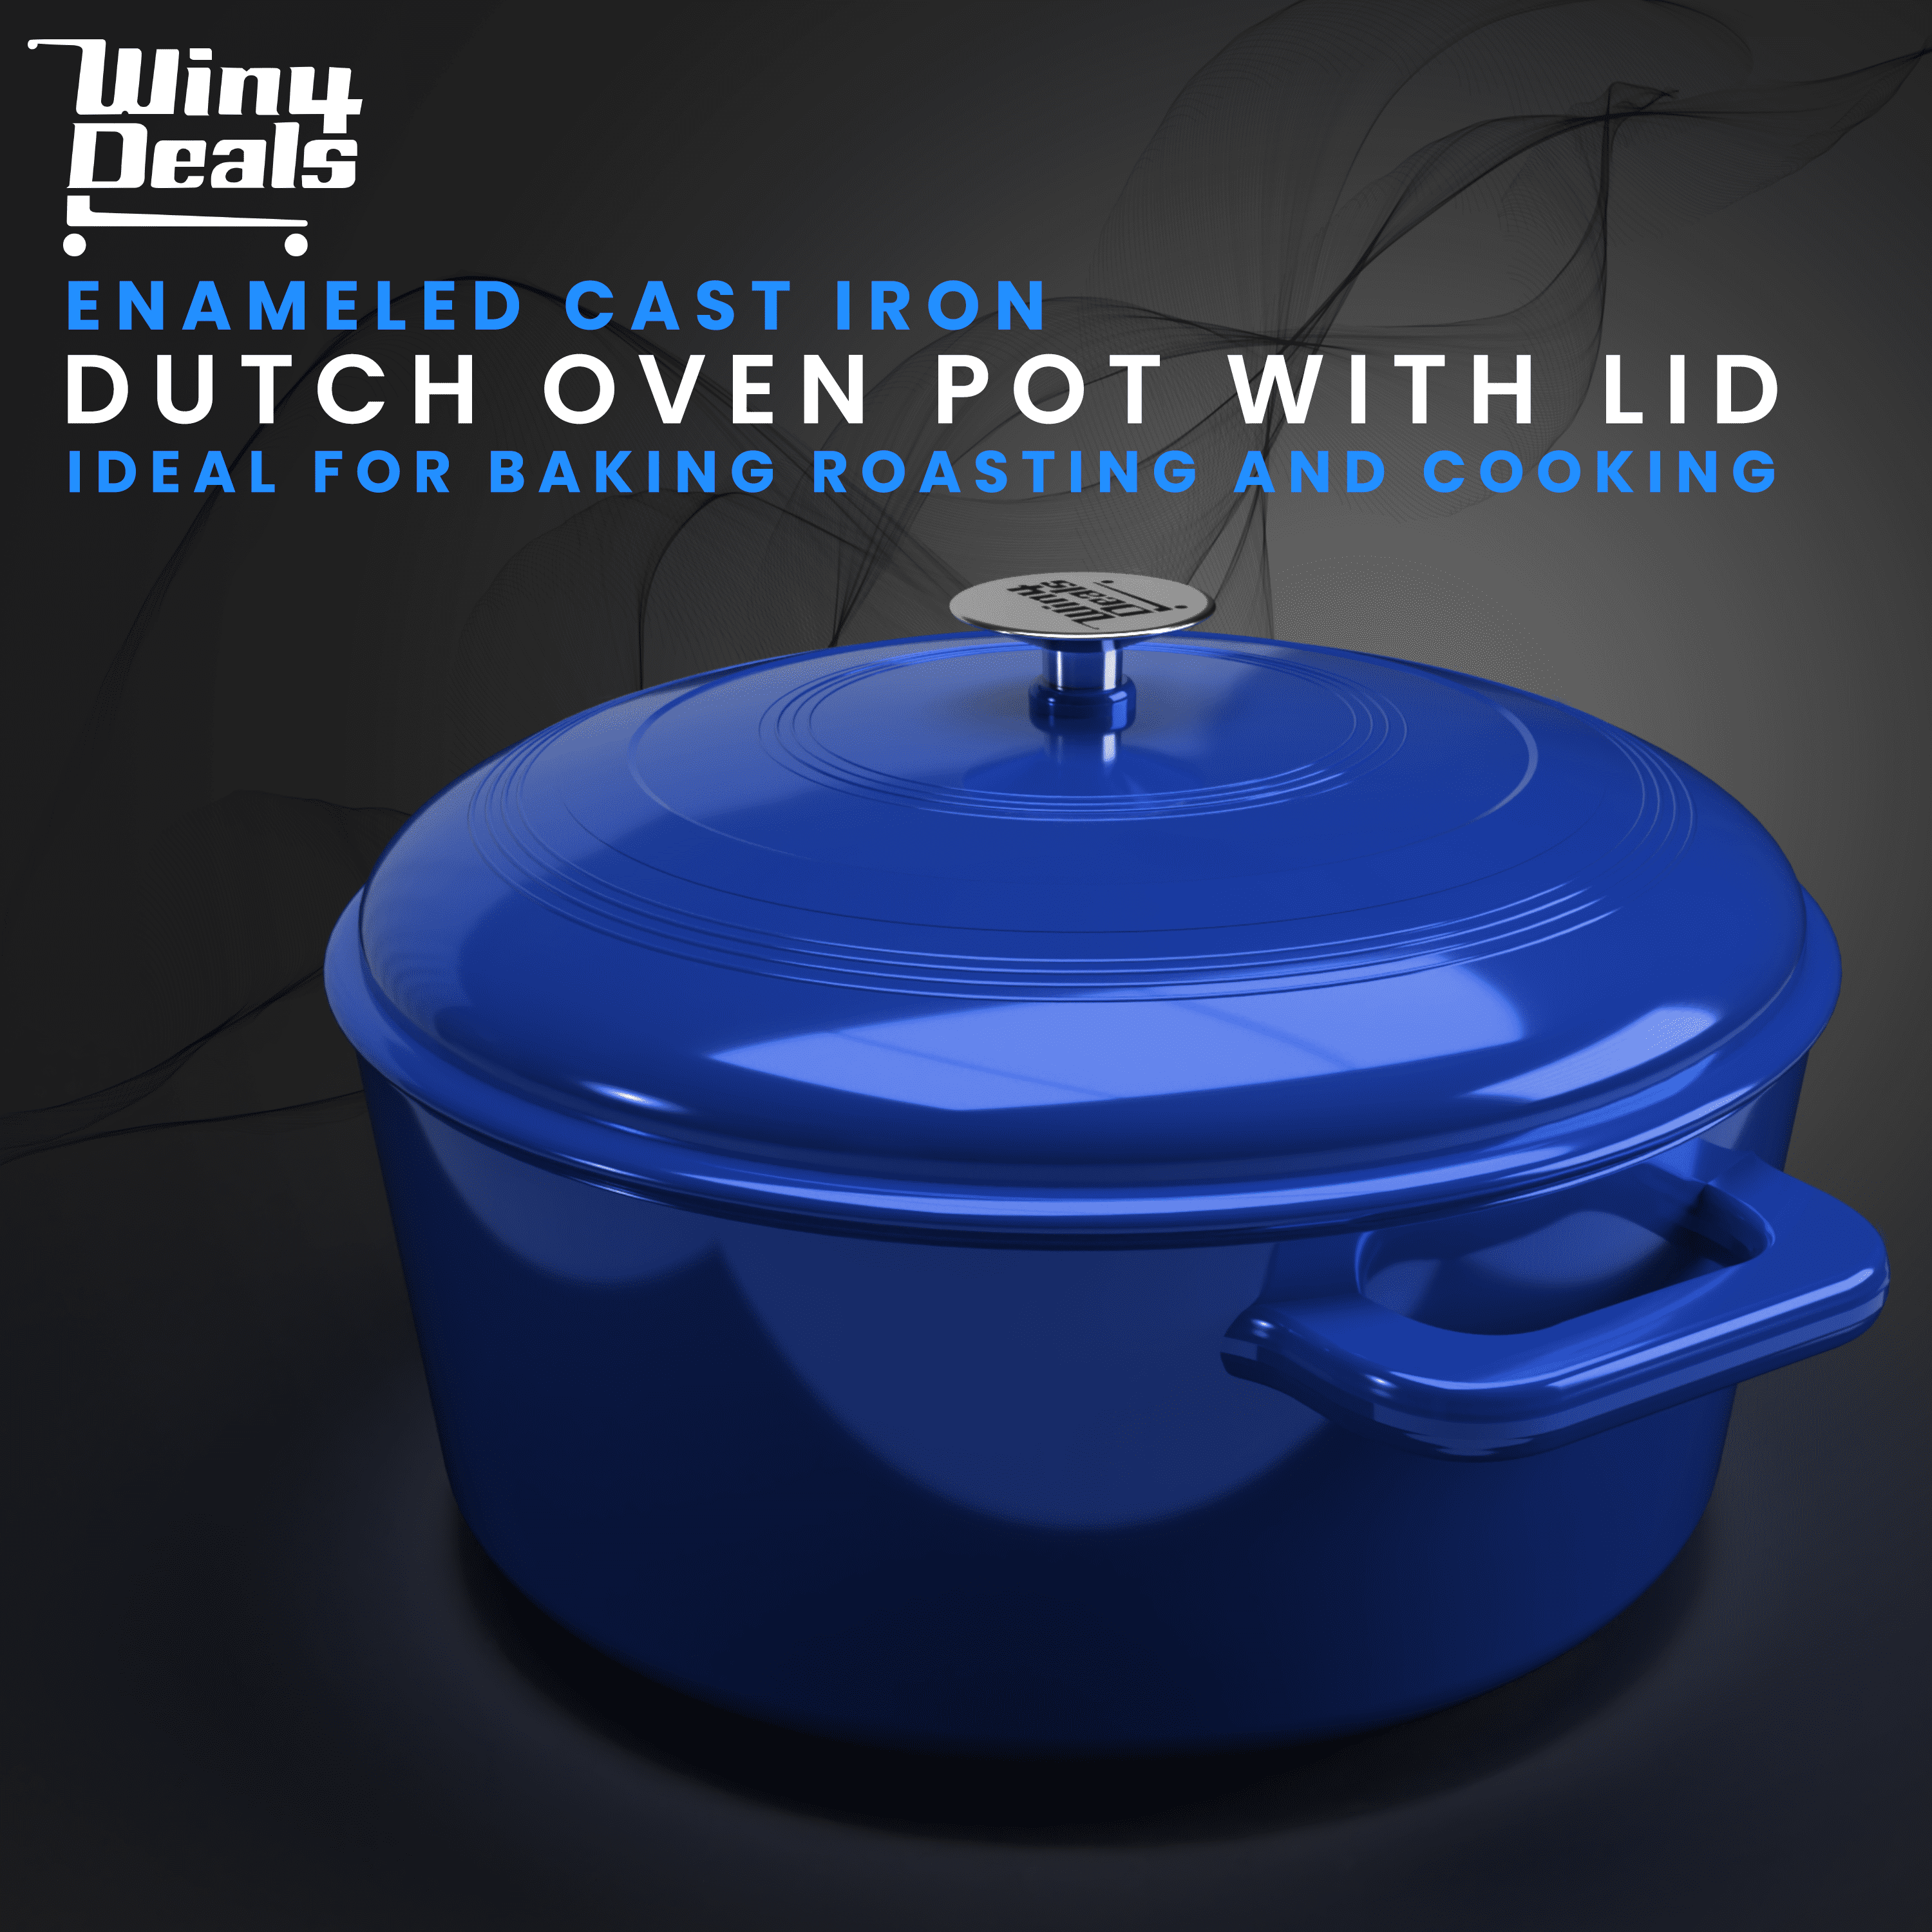 4.5 QT Enameled Cast Iron Dutch Oven with Lid Round Dutch Oven Big Dual  Handles Classic Round Pot for Home Baking, Cooking, Aqua